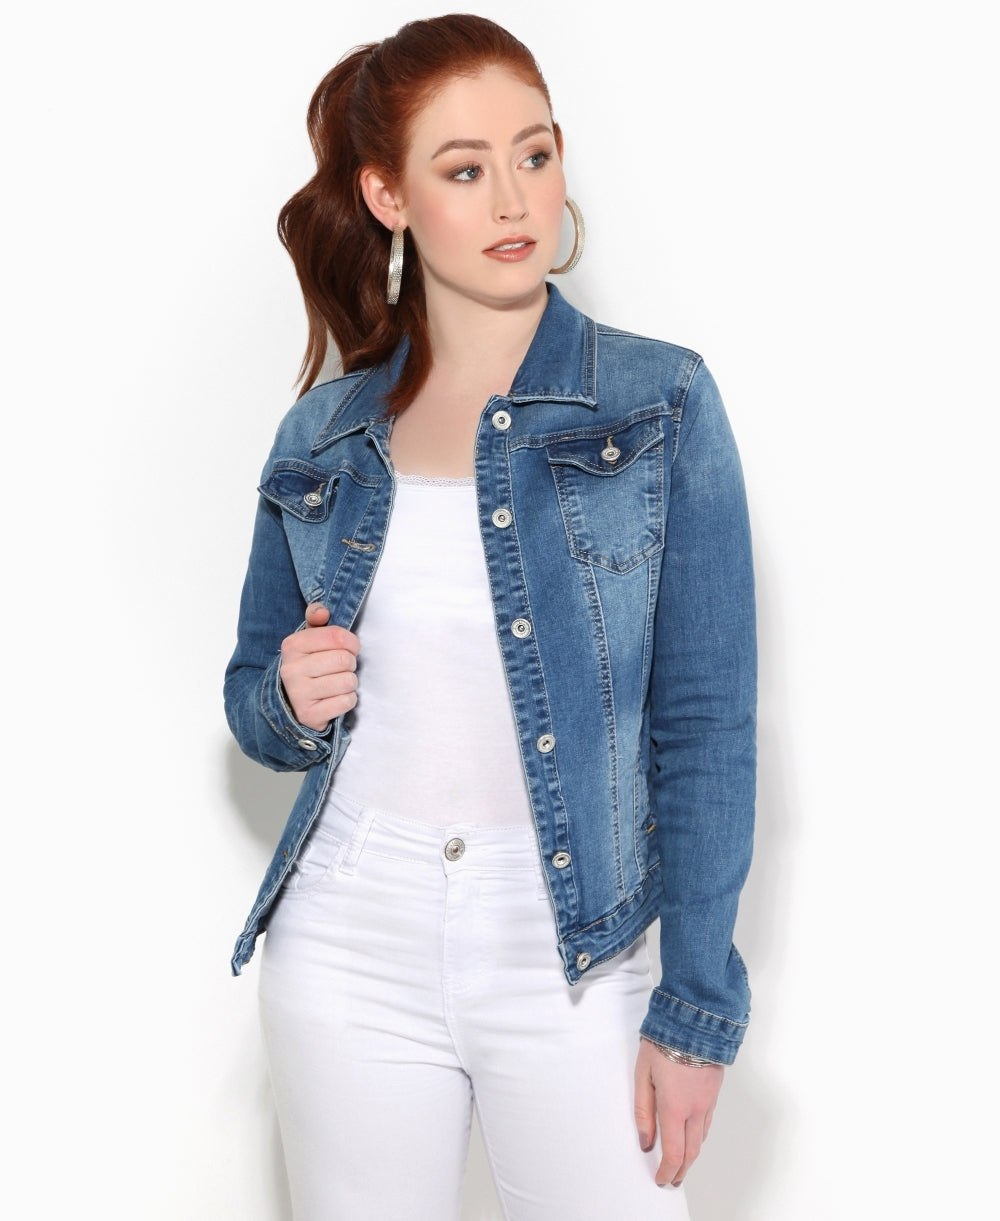 Blue Denim Jacket for Women
Featuring a classic denim jacket design, this cropped jacket from Ace Cart offers a stylish and versatile option for women's casual wear.